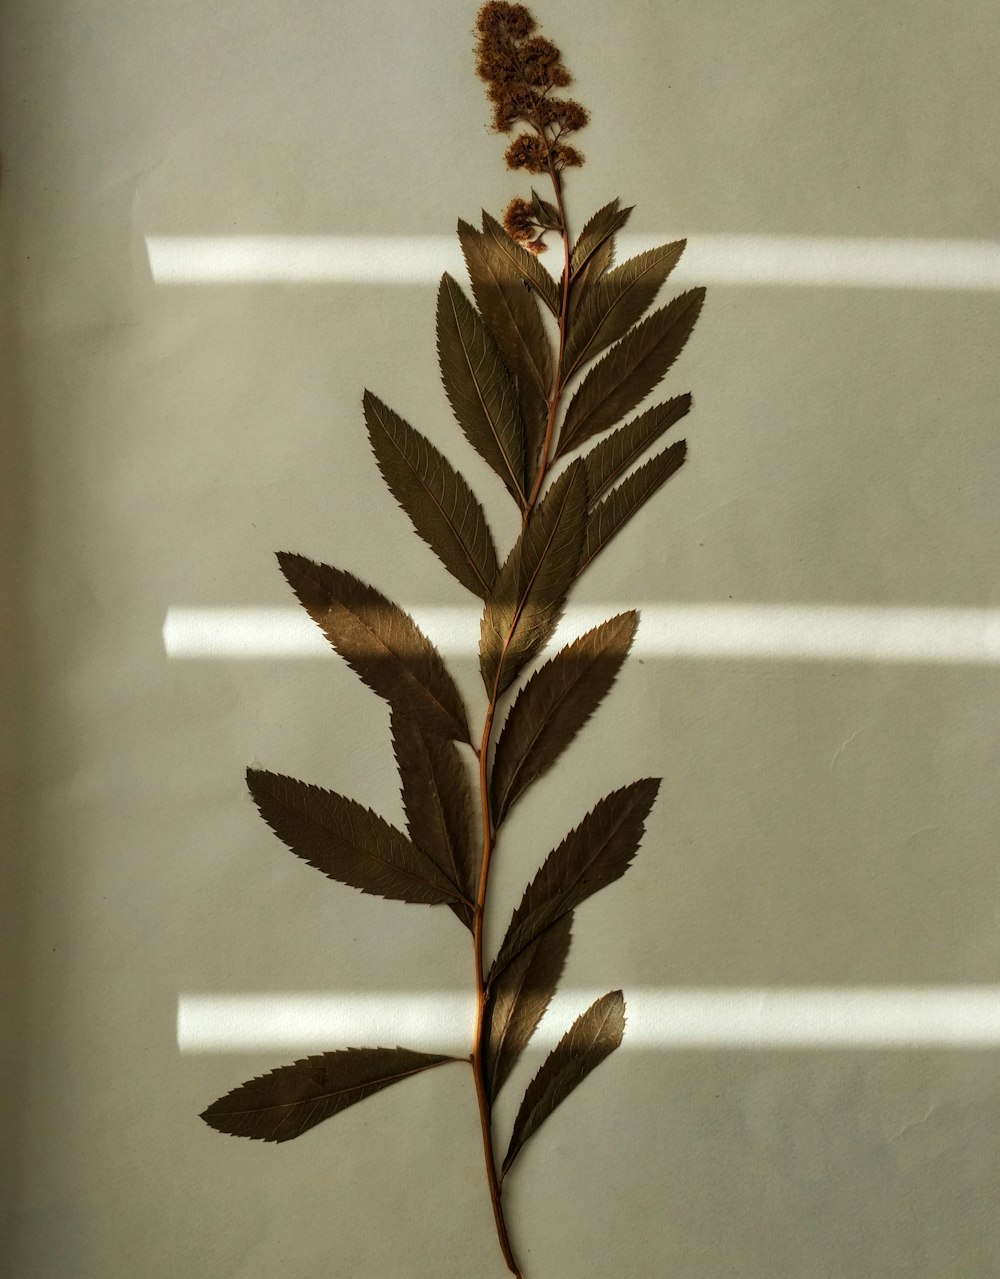 brown leaves on white surface